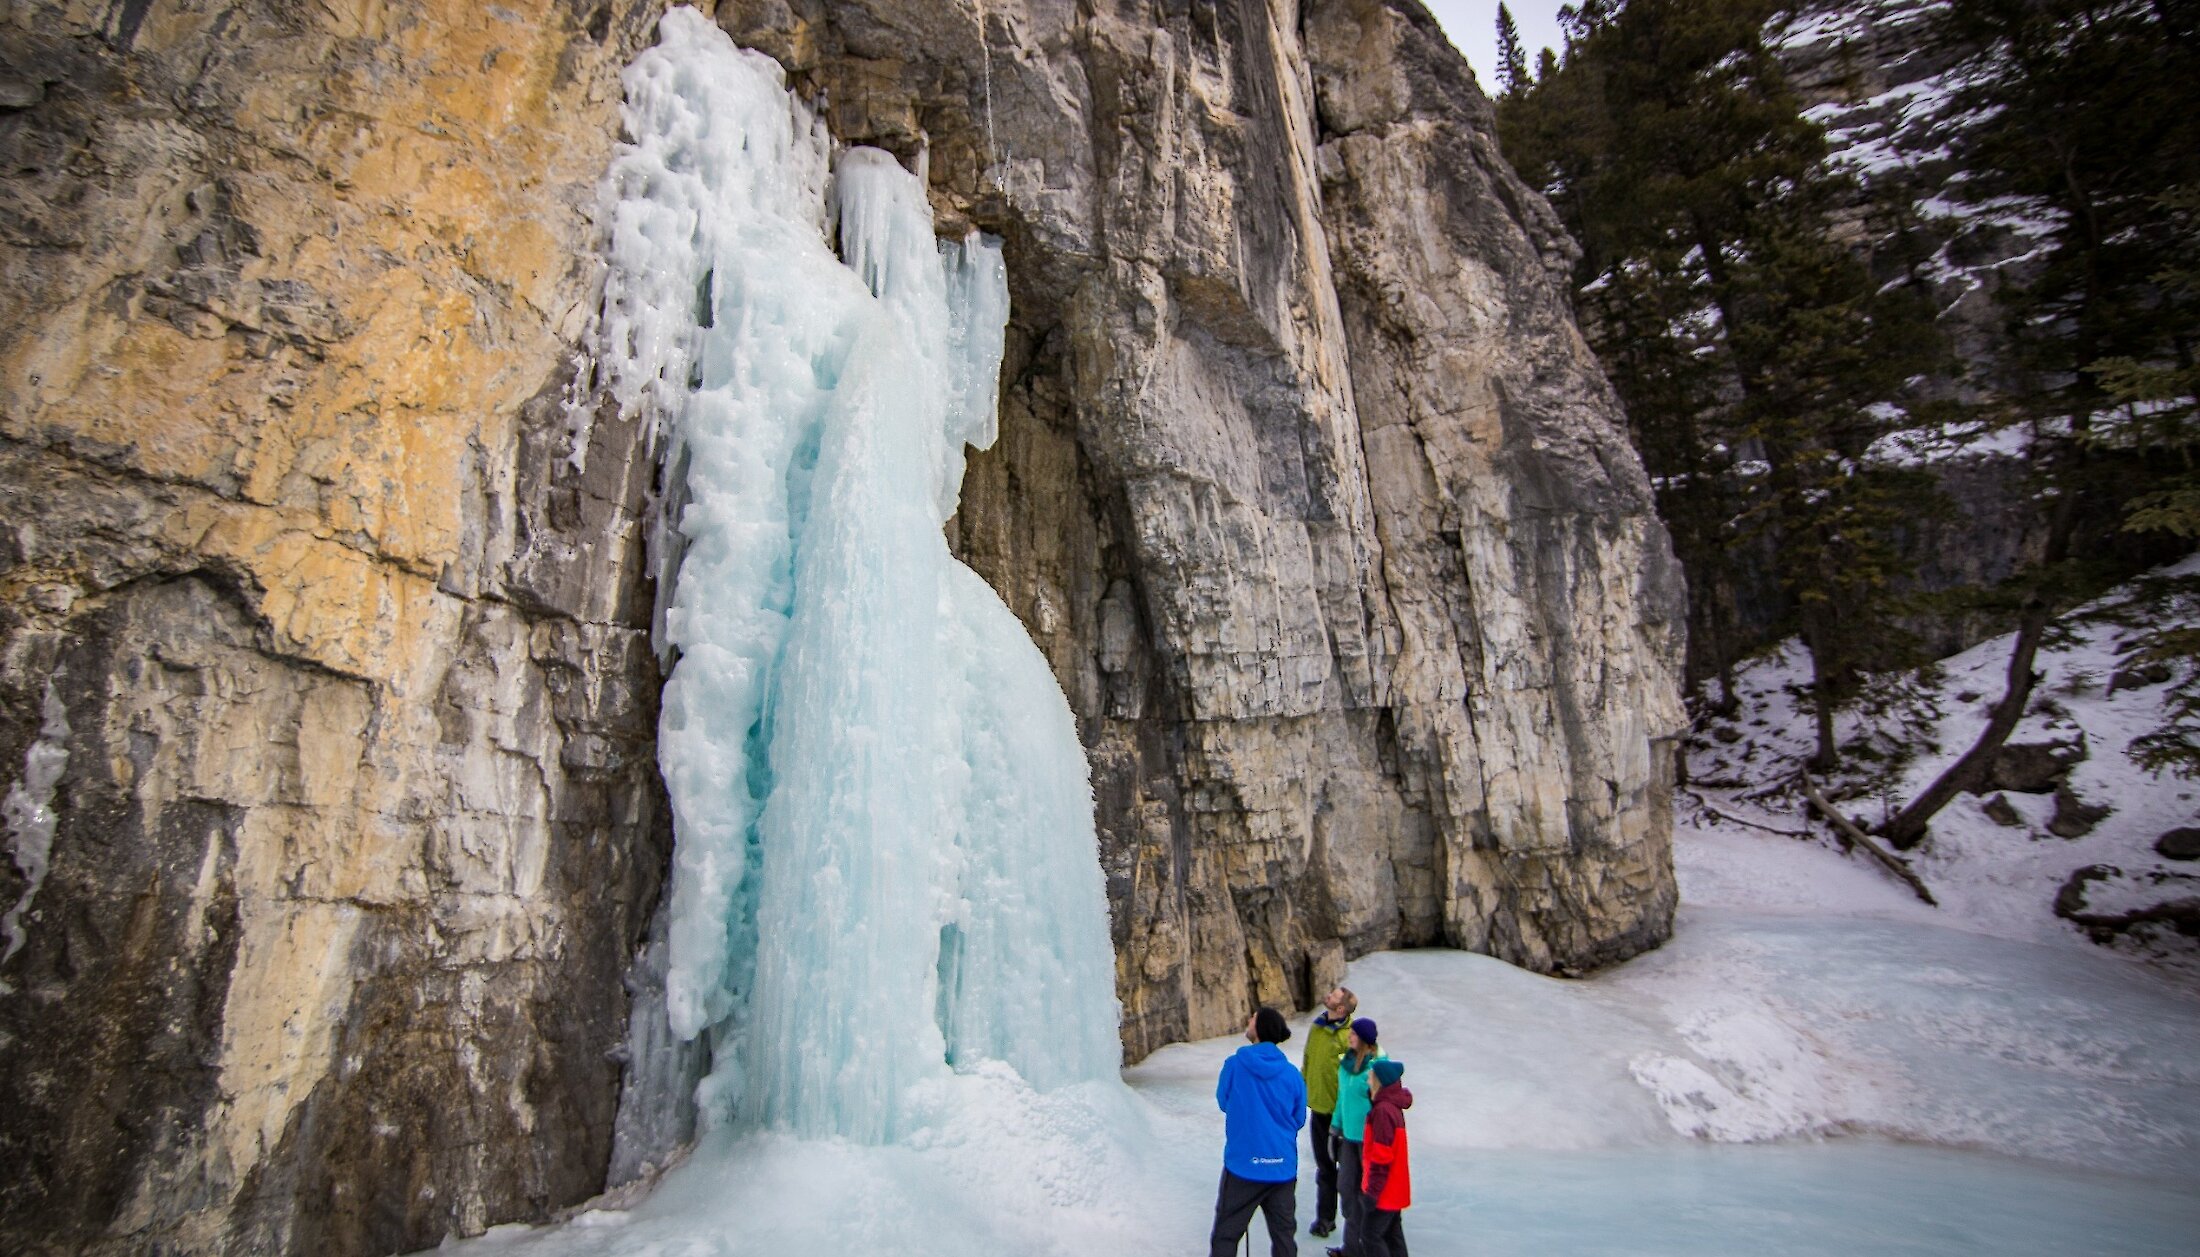 Checking out the ice falls at Grotto Canyon